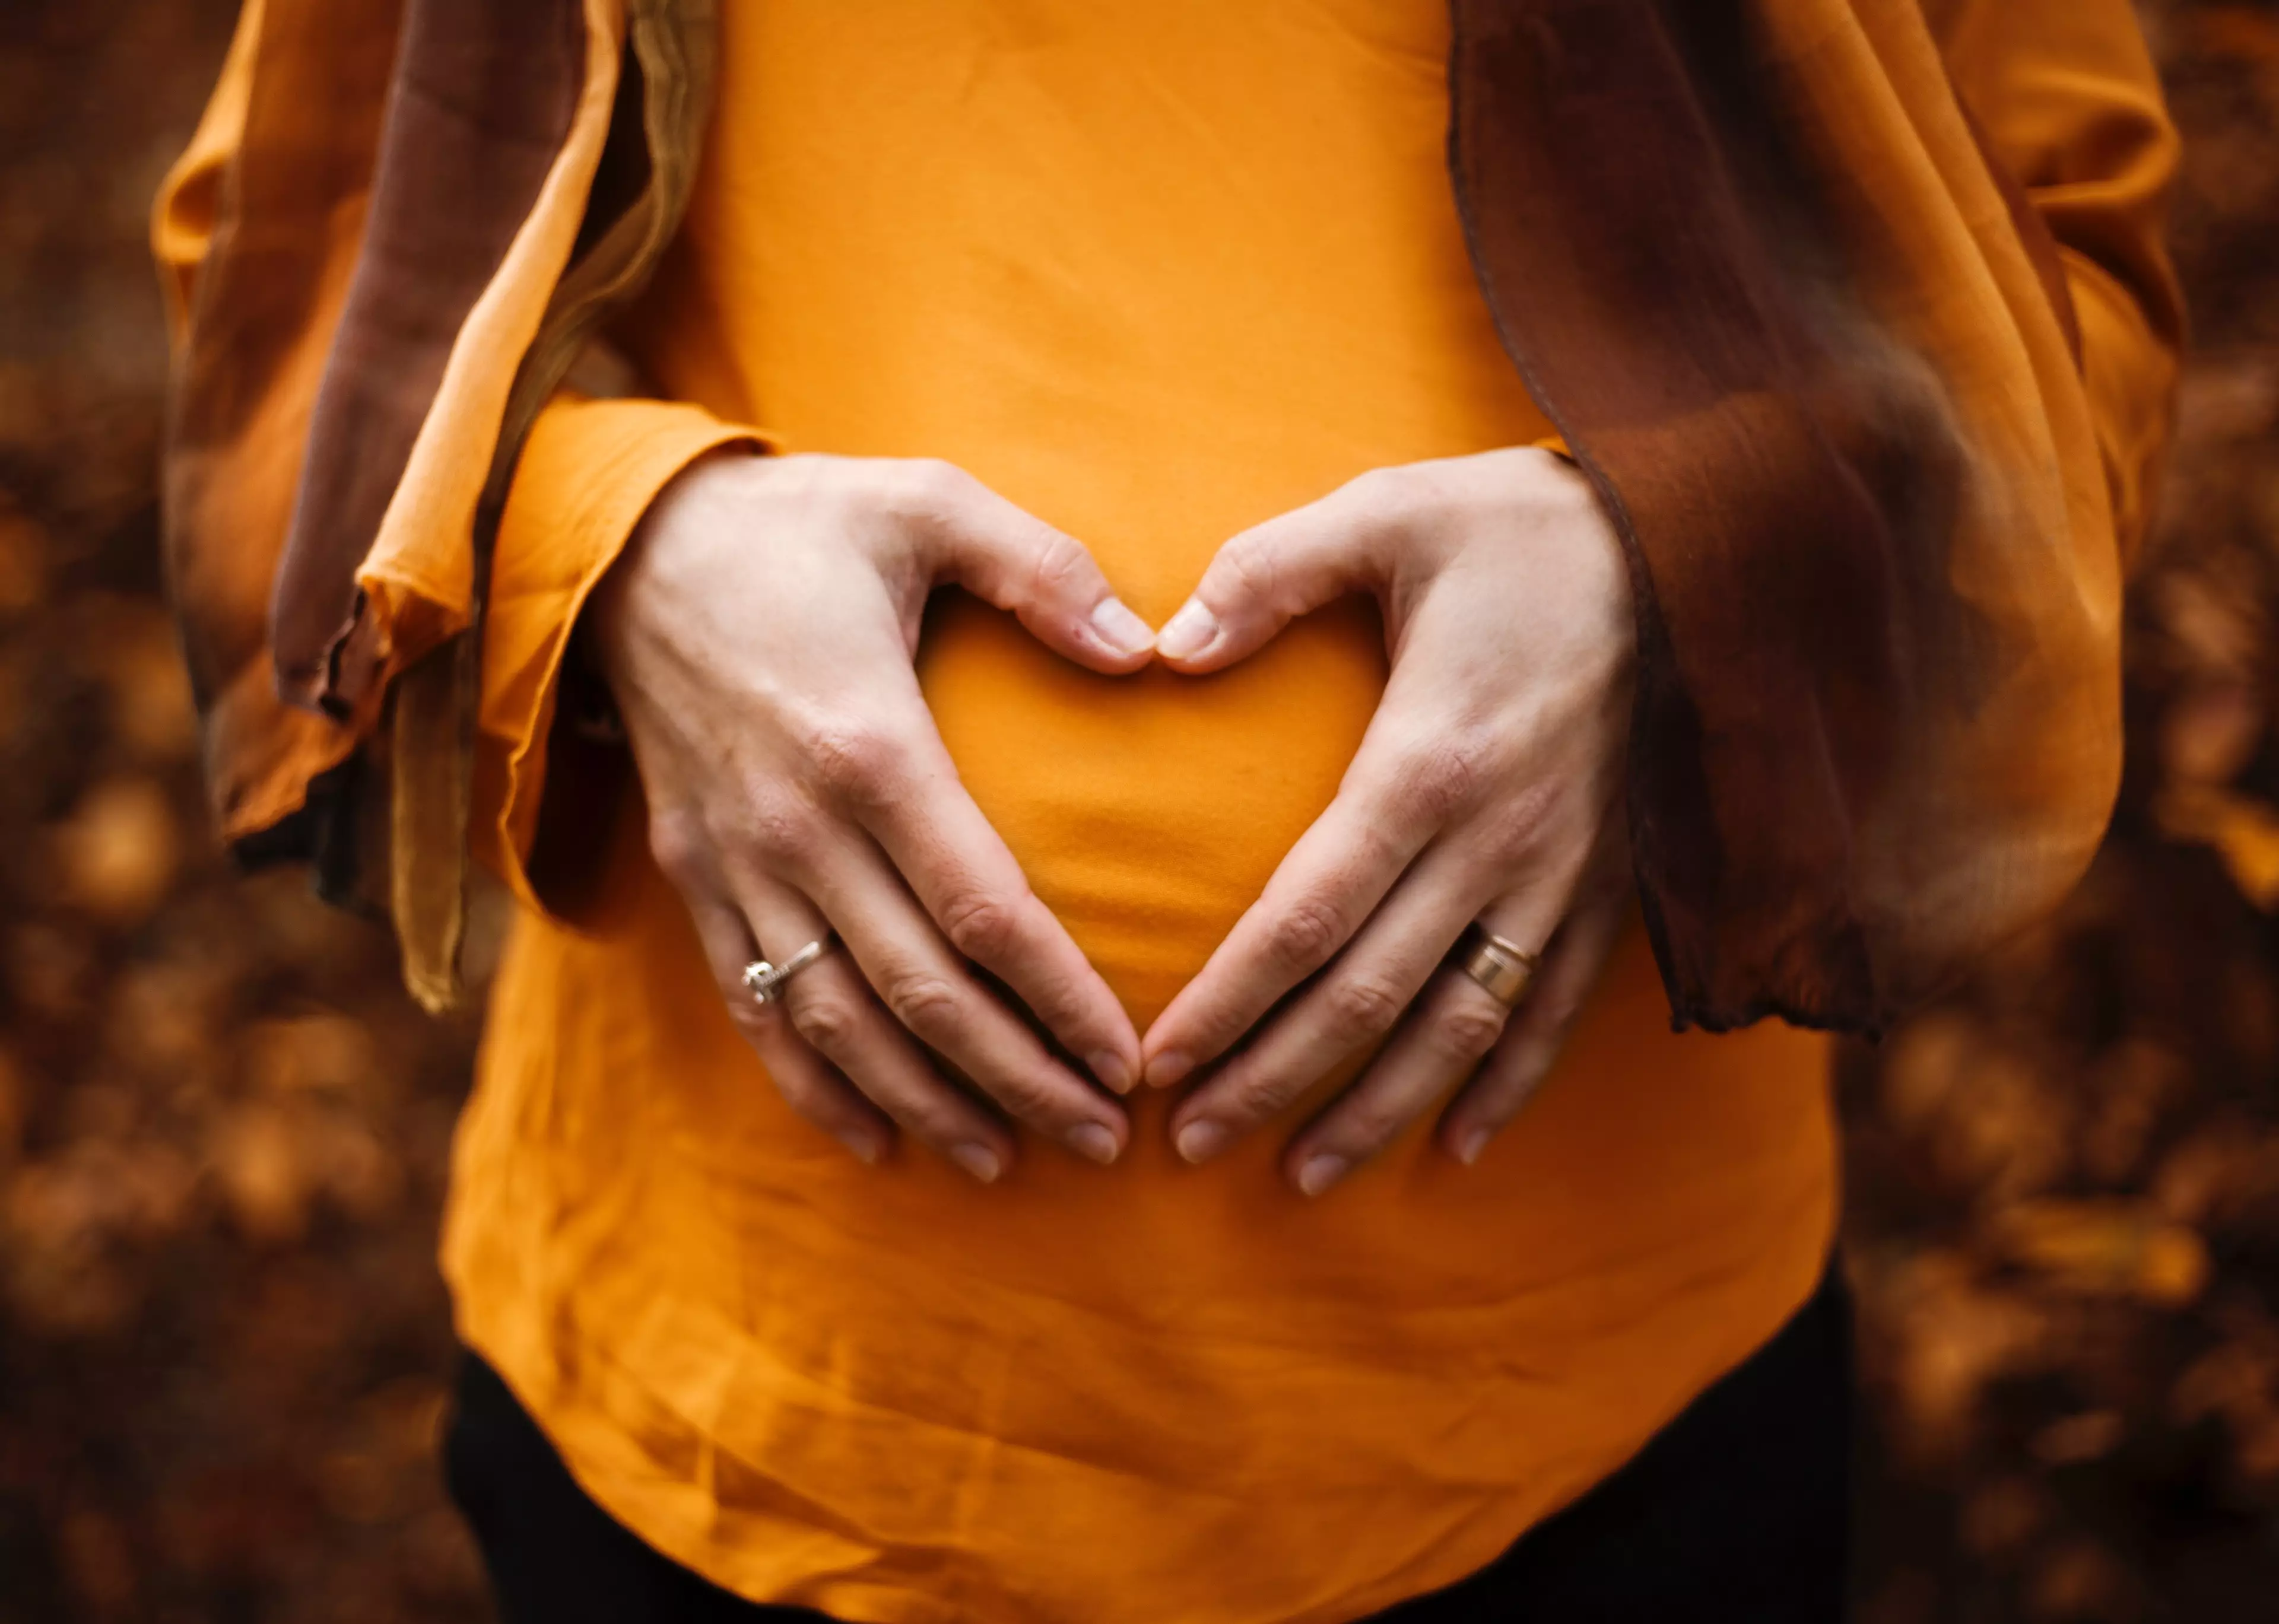 There's more to pregnancy than just growing a bump (